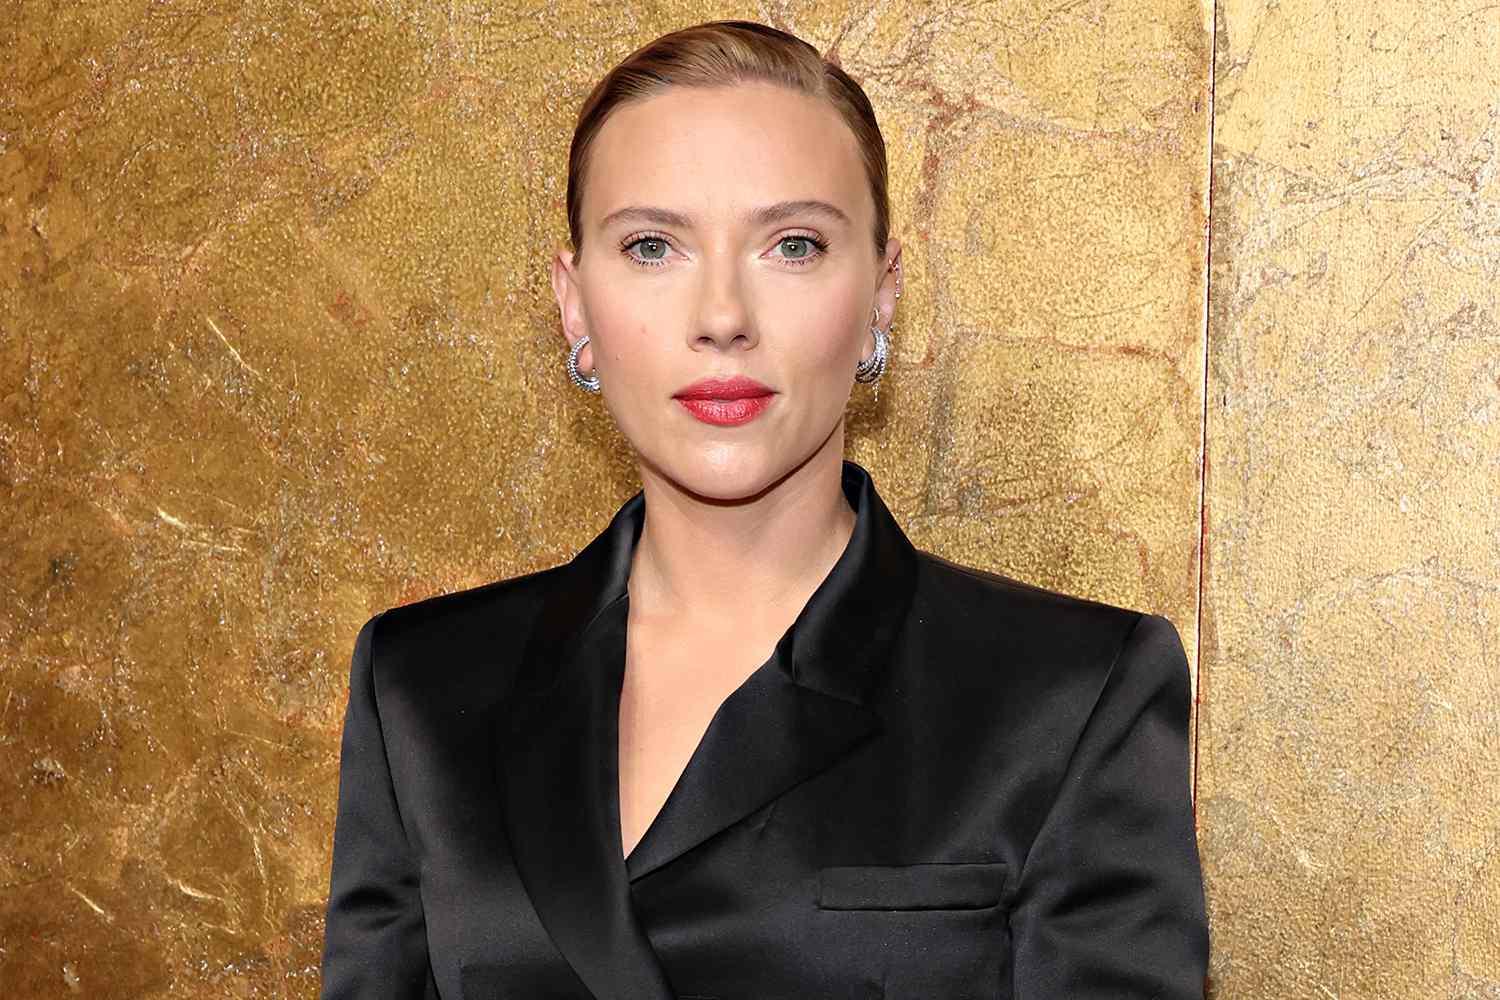 Scarlett Johansson ‘Angered’ and ‘Shocked’ Over OpenAI Employing Voice ‘Eerily Similar to Mine’